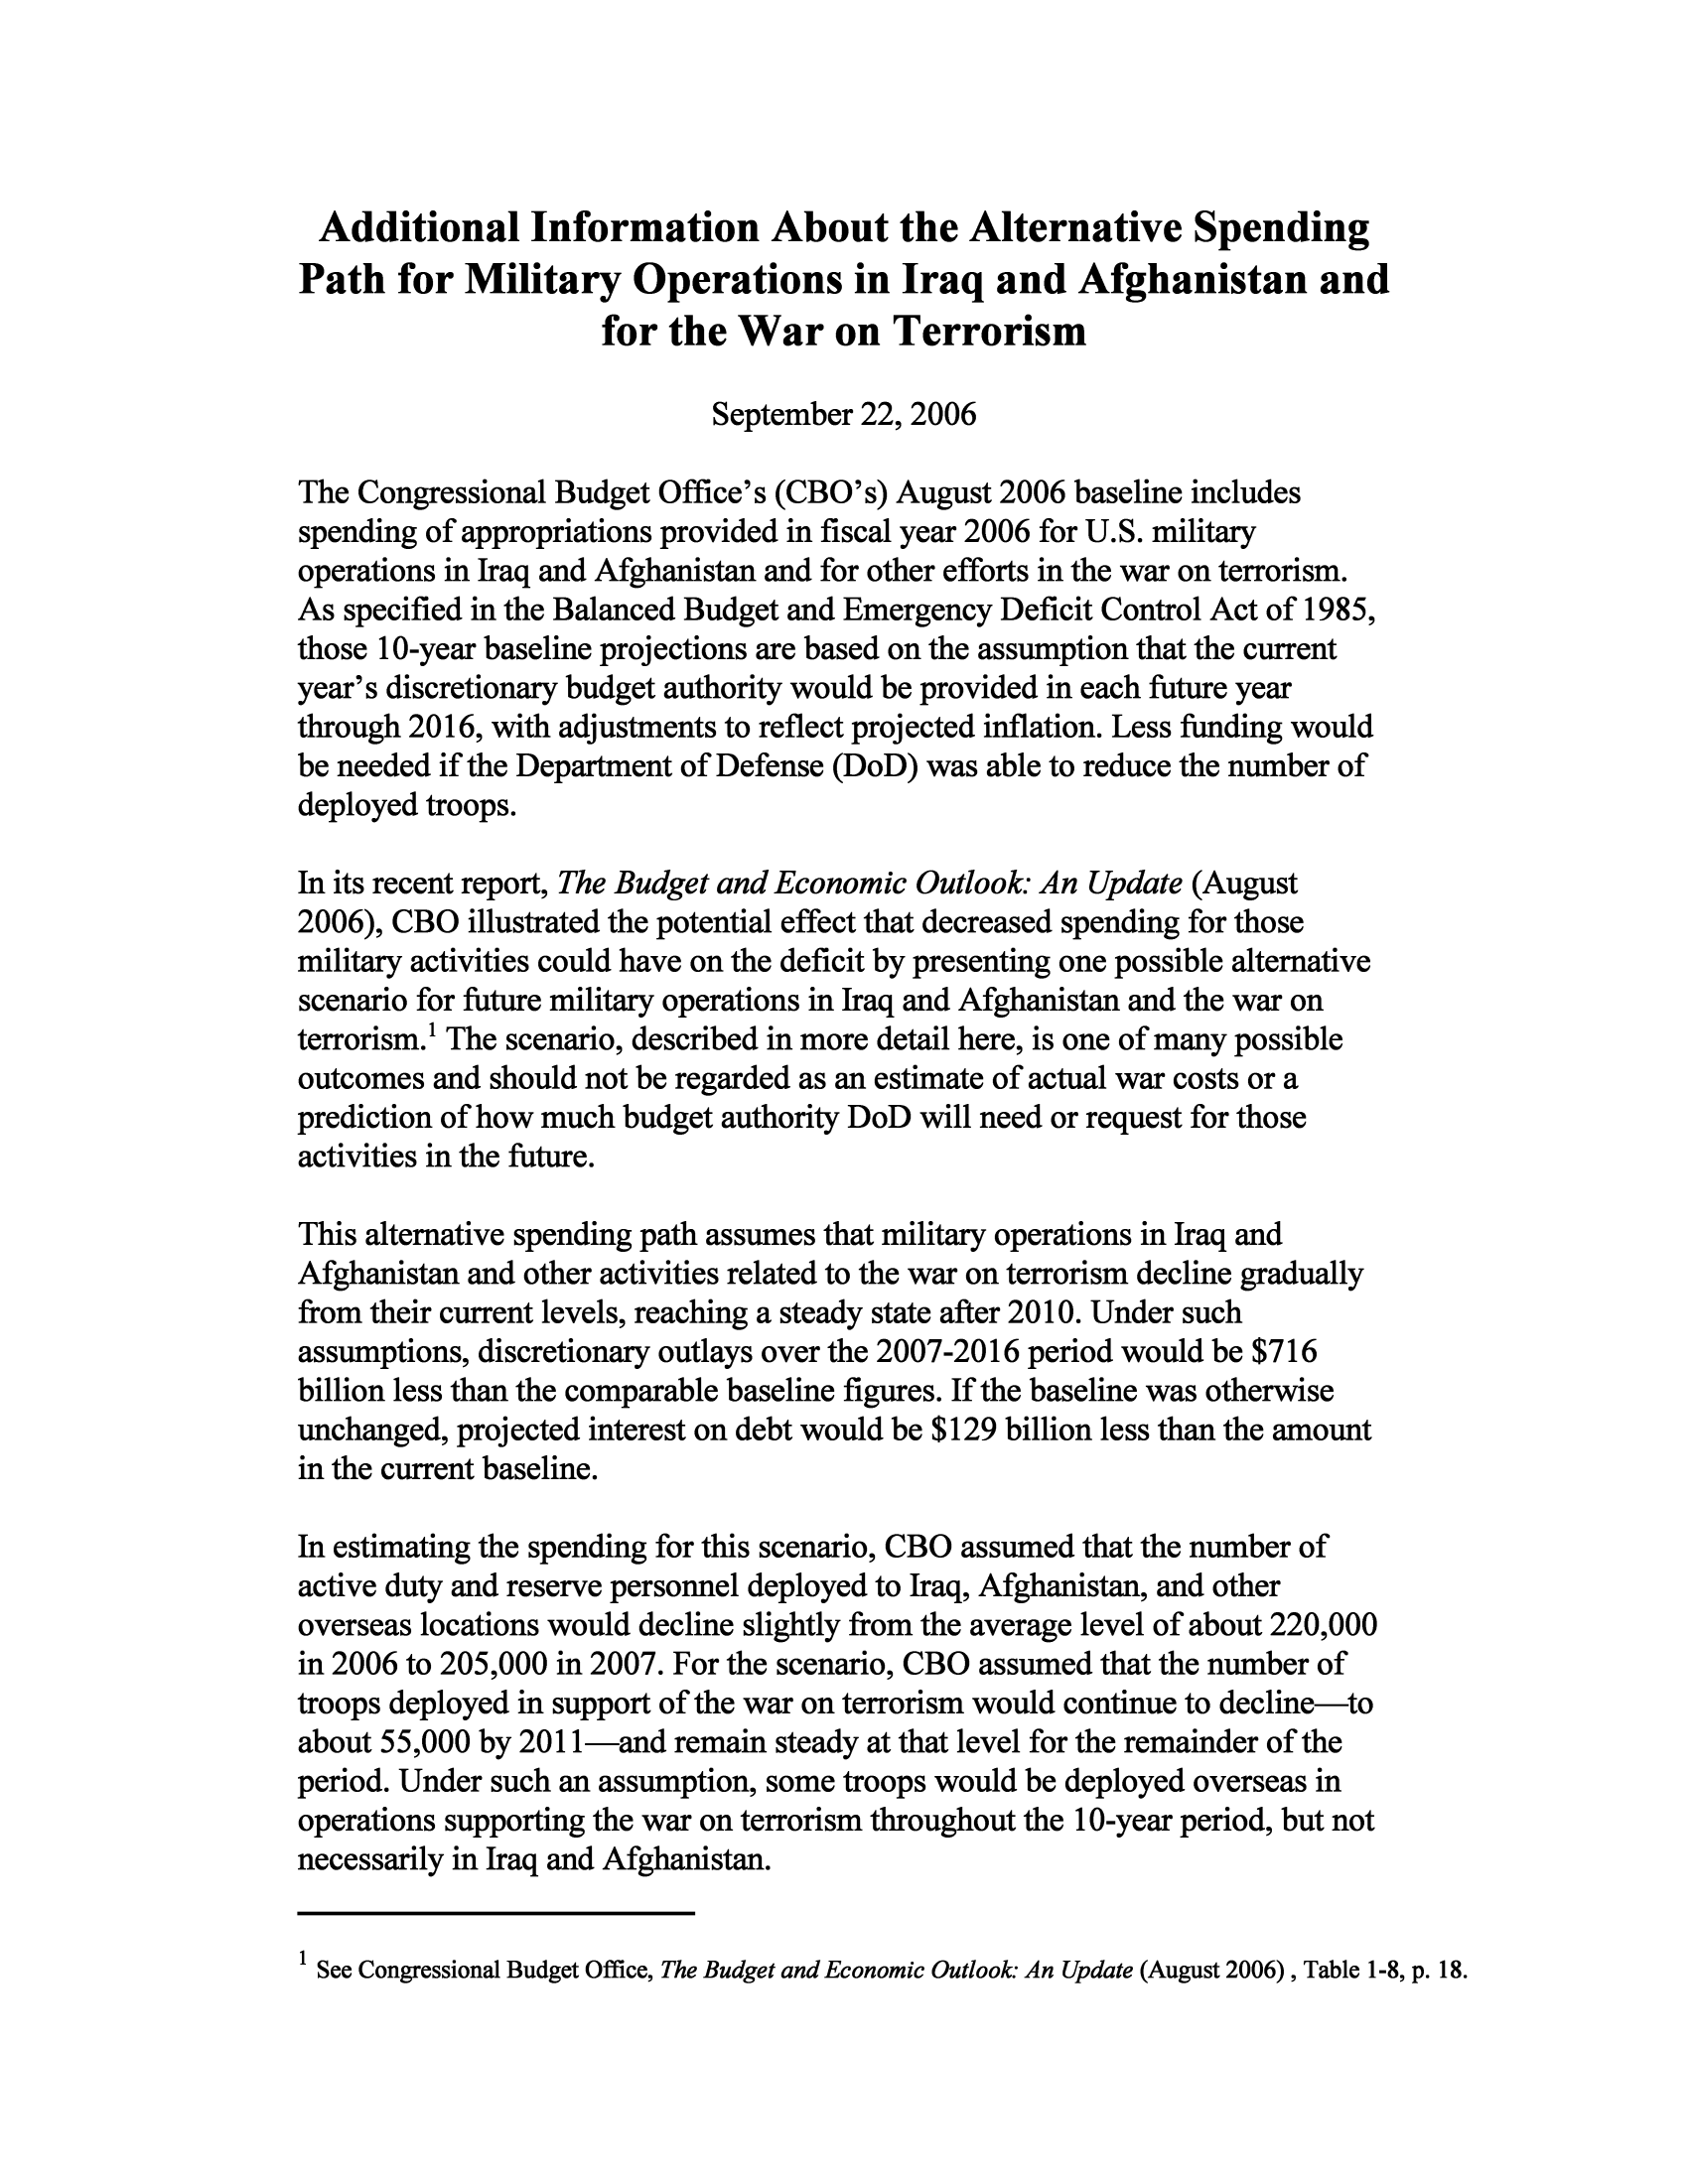 handle is hein.congrec/cbo9747 and id is 1 raw text is: Additional Information About the Alternative Spending
Path for Military Operations in Iraq and Afghanistan and
for the War on Terrorism
September 22, 2006
The Congressional Budget Office's (CBO's) August 2006 baseline includes
spending of appropriations provided in fiscal year 2006 for U.S. military
operations in Iraq and Afghanistan and for other efforts in the war on terrorism.
As specified in the Balanced Budget and Emergency Deficit Control Act of 1985,
those 10-year baseline projections are based on the assumption that the current
year's discretionary budget authority would be provided in each future year
through 2016, with adjustments to reflect projected inflation. Less funding would
be needed if the Department of Defense (DoD) was able to reduce the number of
deployed troops.
In its recent report, The Budget and Economic Outlook: An Update (August
2006), CBO illustrated the potential effect that decreased spending for those
military activities could have on the deficit by presenting one possible alternative
scenario for future military operations in Iraq and Afghanistan and the war on
terrorism.! The scenario, described in more detail here, is one of many possible
outcomes and should not be regarded as an estimate of actual war costs or a
prediction of how much budget authority DoD will need or request for those
activities in the future.
This alternative spending path assumes that military operations in Iraq and
Afghanistan and other activities related to the war on terrorism decline gradually
from their current levels, reaching a steady state after 2010. Under such
assumptions, discretionary outlays over the 2007-2016 period would be $716
billion less than the comparable baseline figures. If the baseline was otherwise
unchanged, projected interest on debt would be $129 billion less than the amount
in the current baseline.
In estimating the spending for this scenario, CBO assumed that the number of
active duty and reserve personnel deployed to Iraq, Afghanistan, and other
overseas locations would decline slightly from the average level of about 220,000
in 2006 to 205,000 in 2007. For the scenario, CBO assumed that the number of
troops deployed in support of the war on terrorism would continue to decline-to
about 55,000 by 2011-and remain steady at that level for the remainder of the
period. Under such an assumption, some troops would be deployed overseas in
operations supporting the war on terrorism throughout the 10-year period, but not
necessarily in Iraq and Afghanistan.

1 See Congressional Budget Office, The Budget and Economic Outlook: An Update (August 2006), Table 1-8, p. 18.


